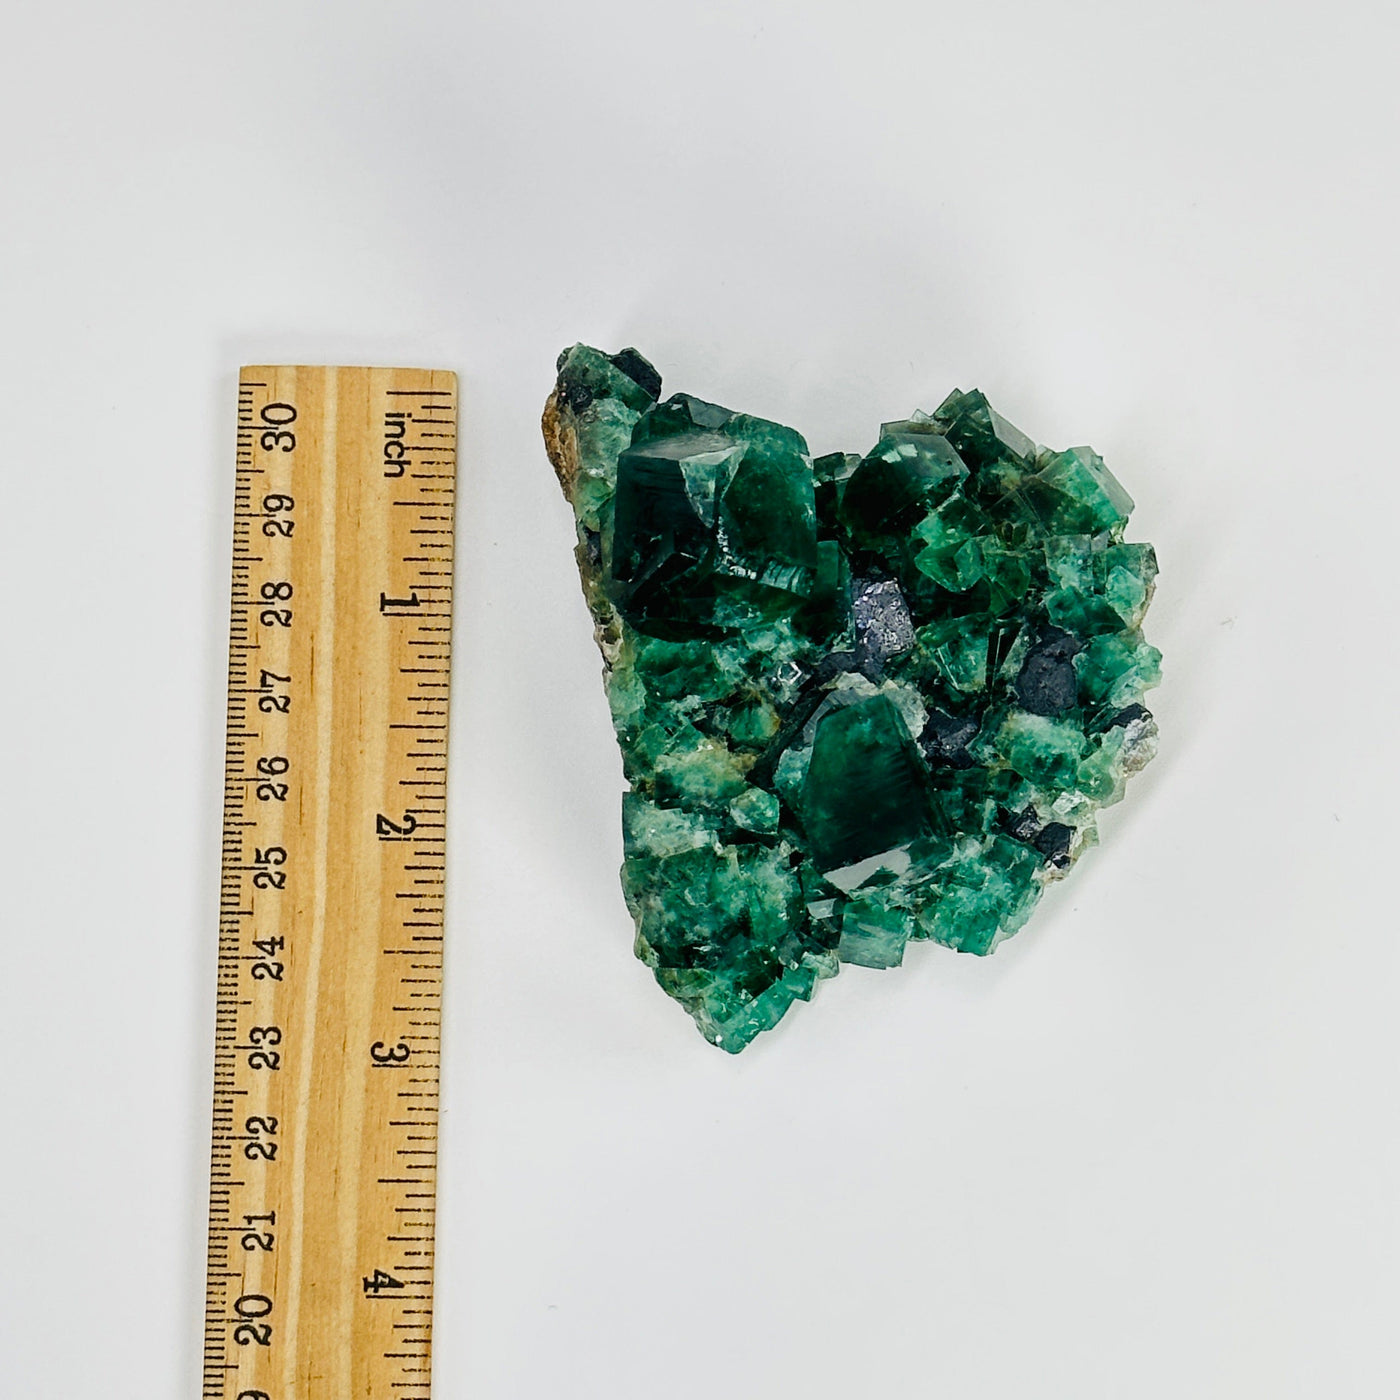 cubic fluorite next to a ruler for size reference